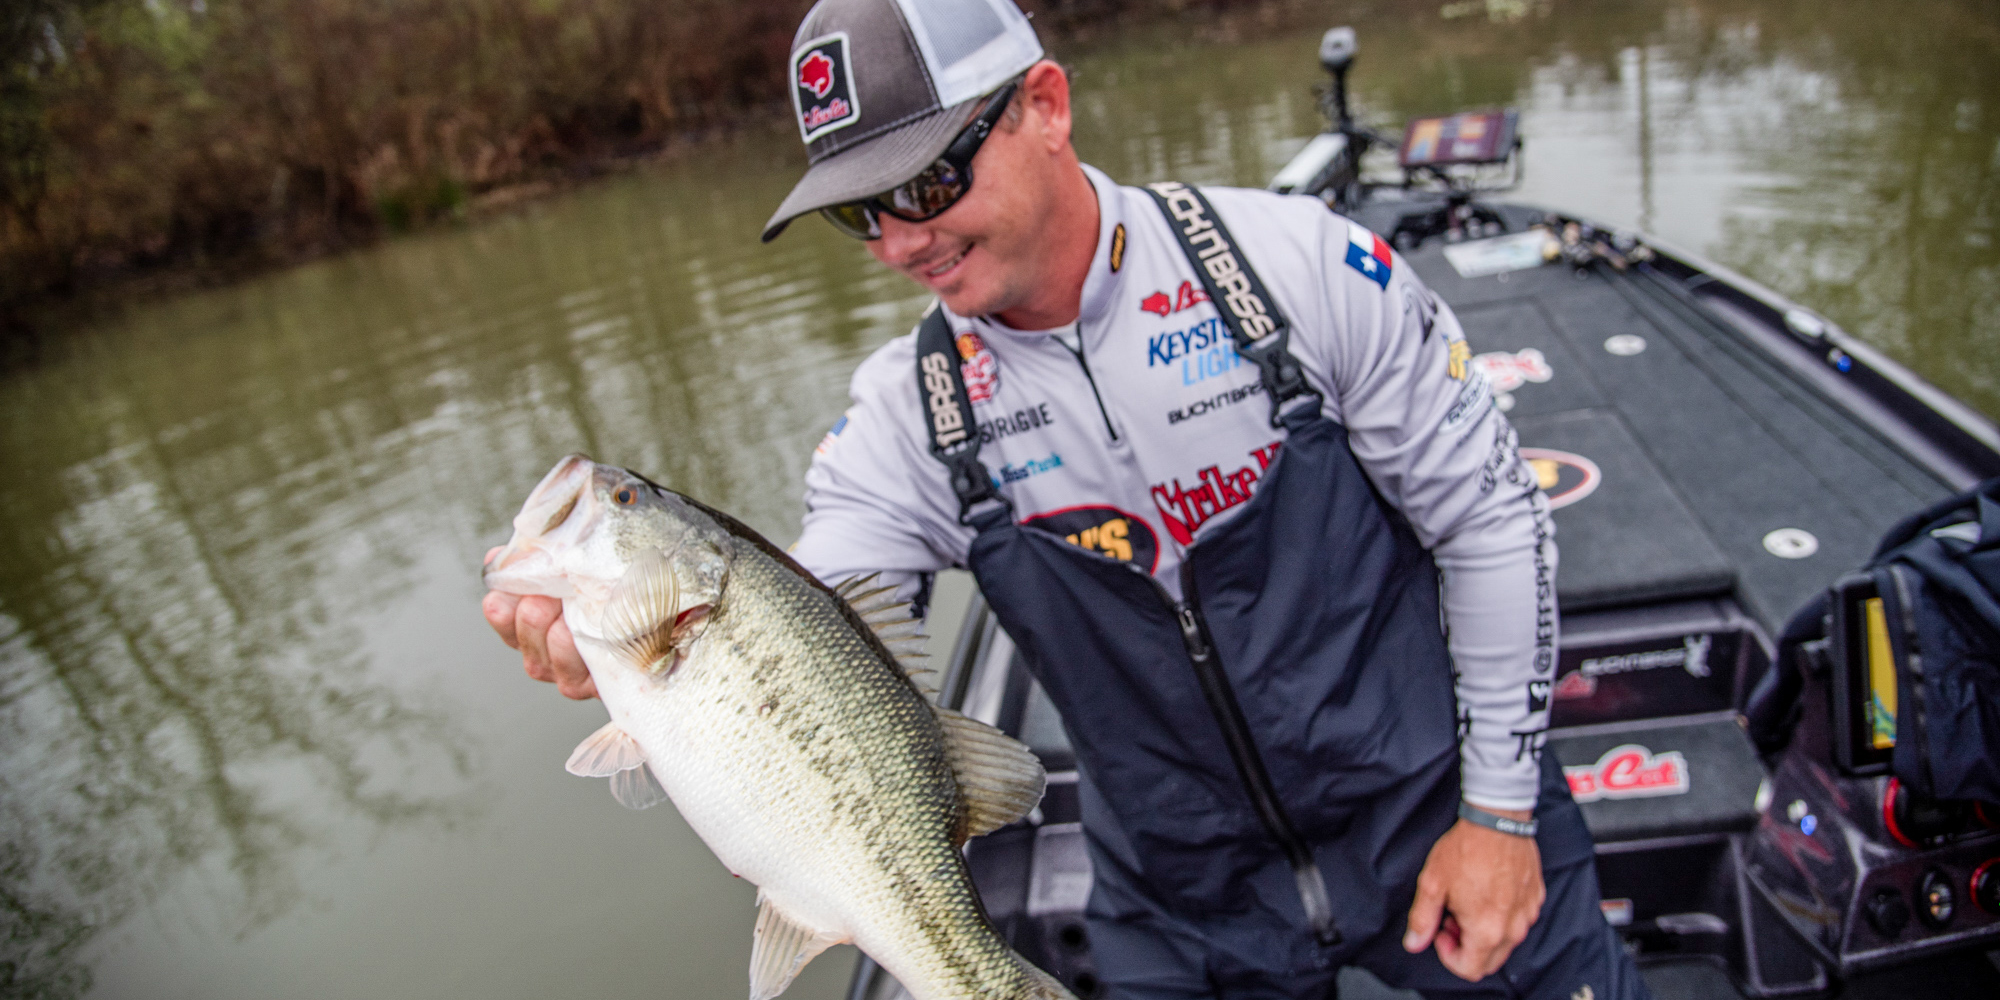 JEFF SPRAGUE: Keeping Busy is What I Do - Major League Fishing